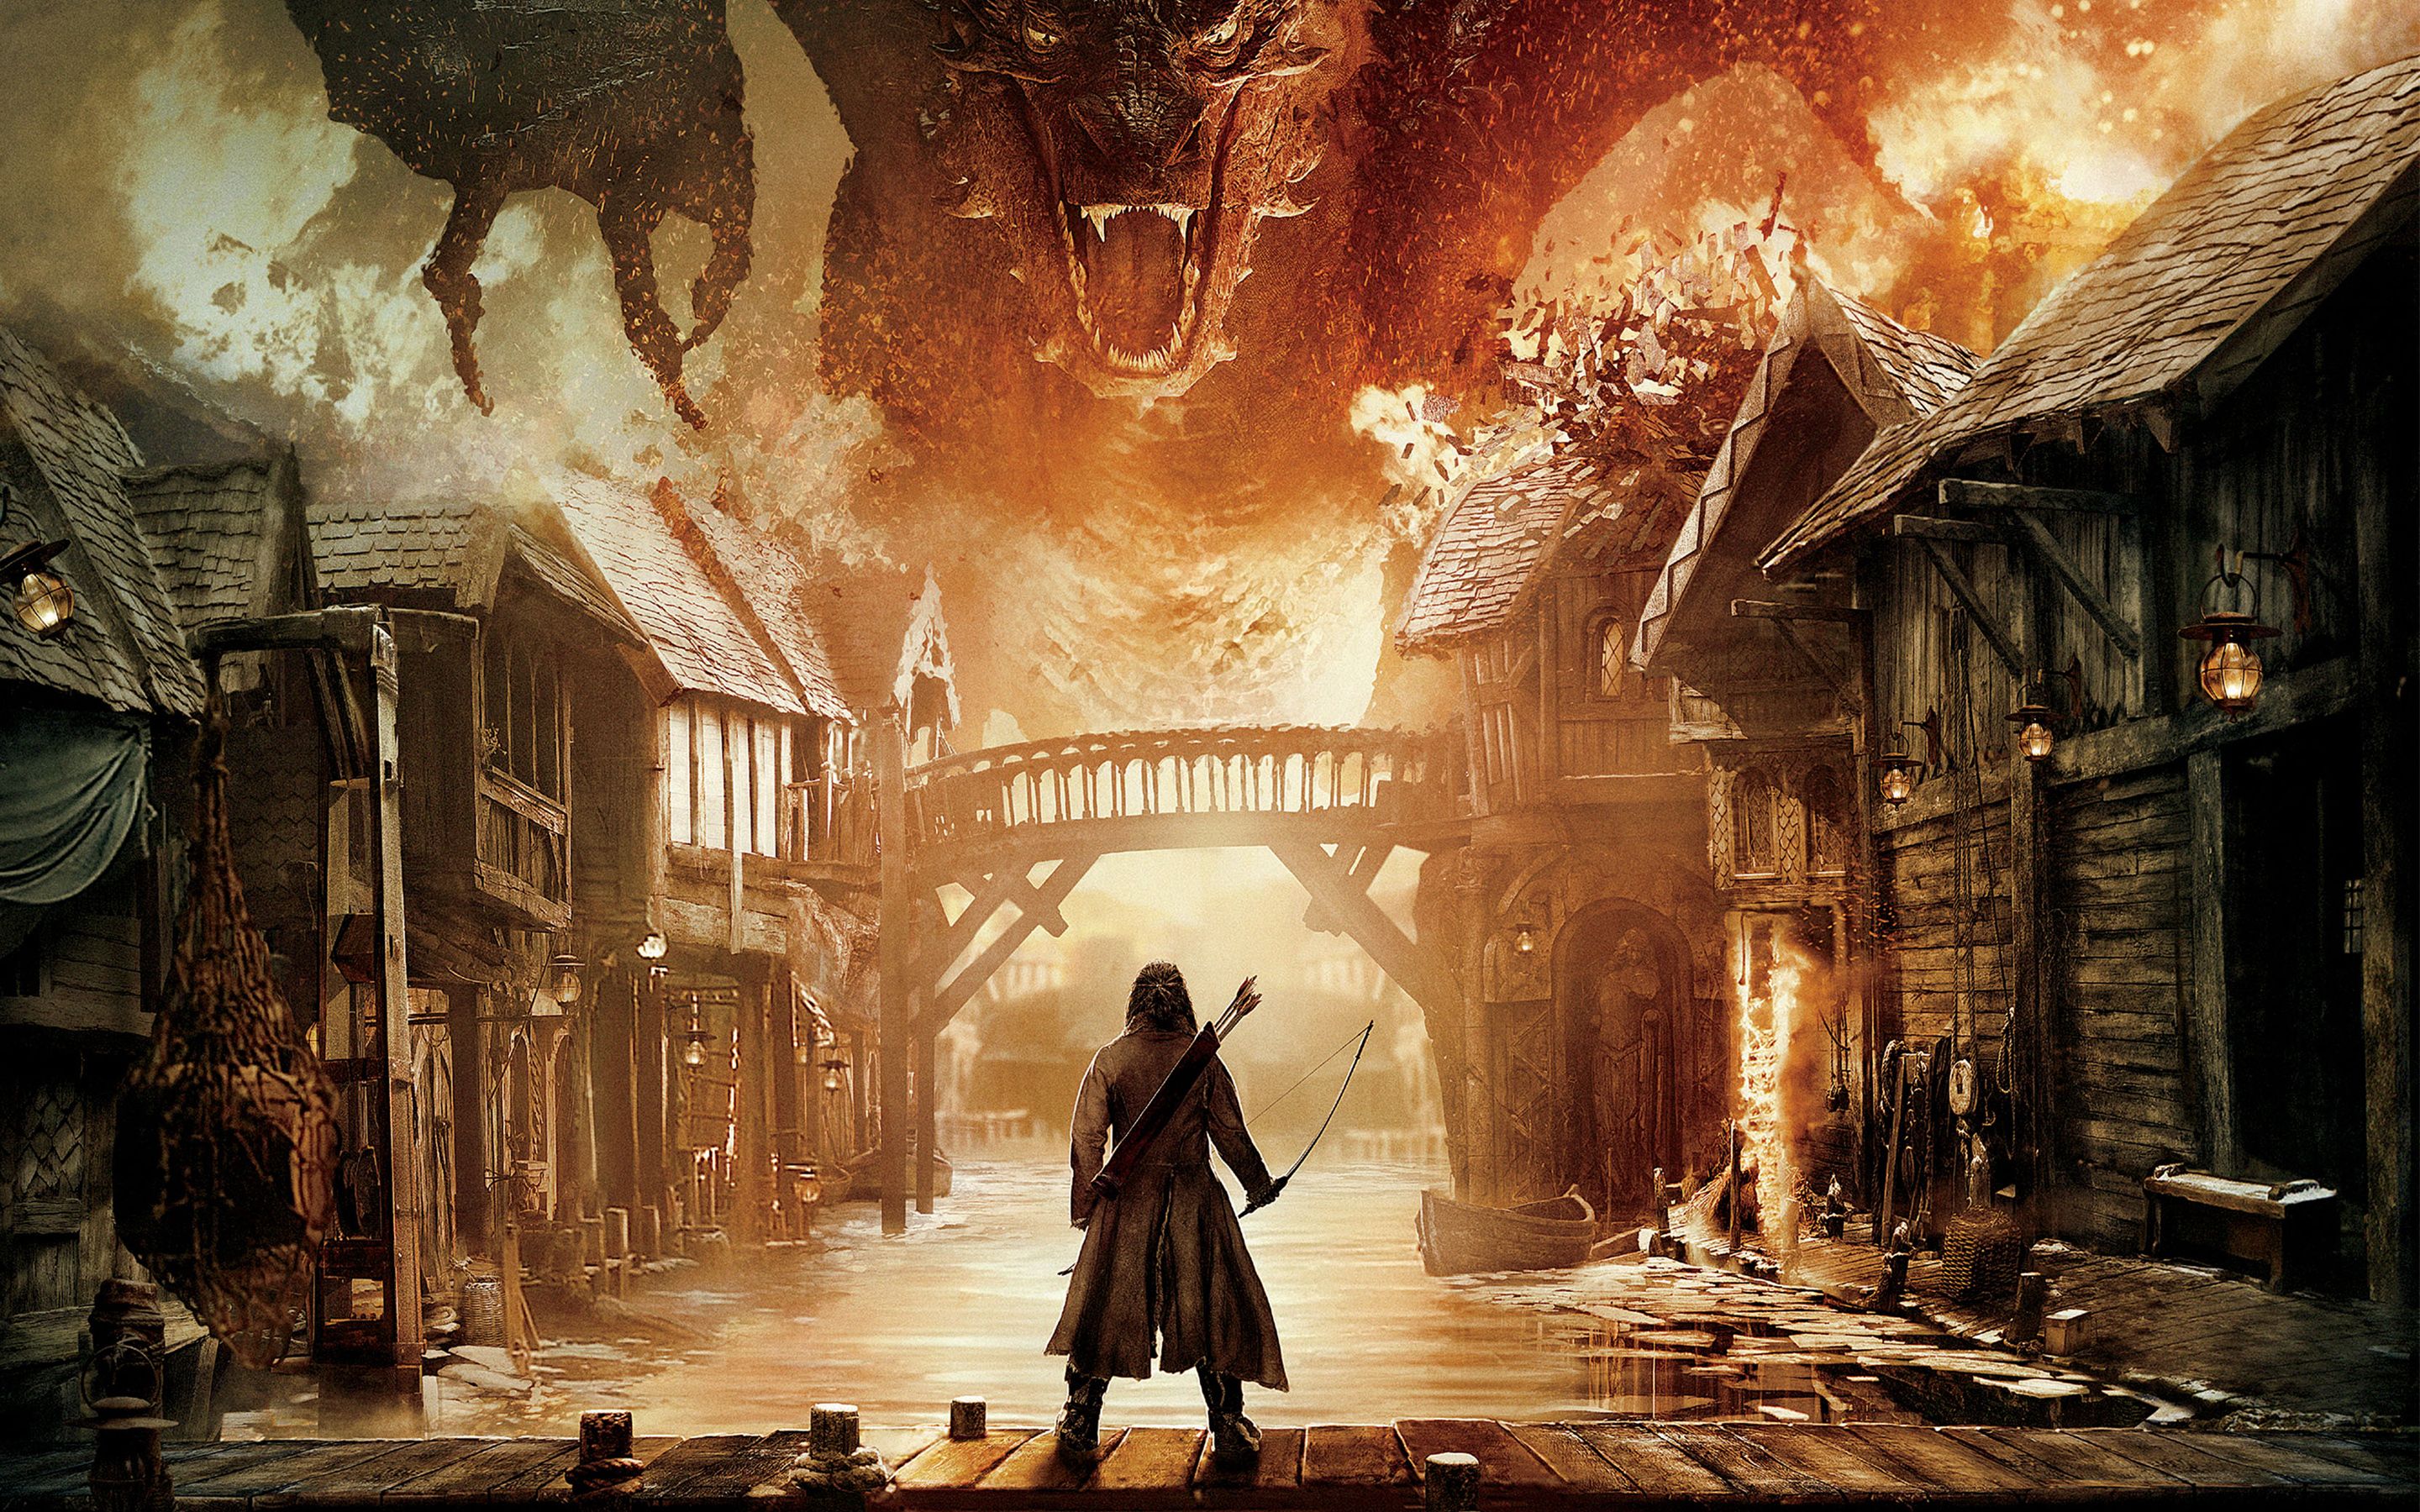 The Hobbit The Battle of the Five Armies Wallpapers | HD Wallpapers